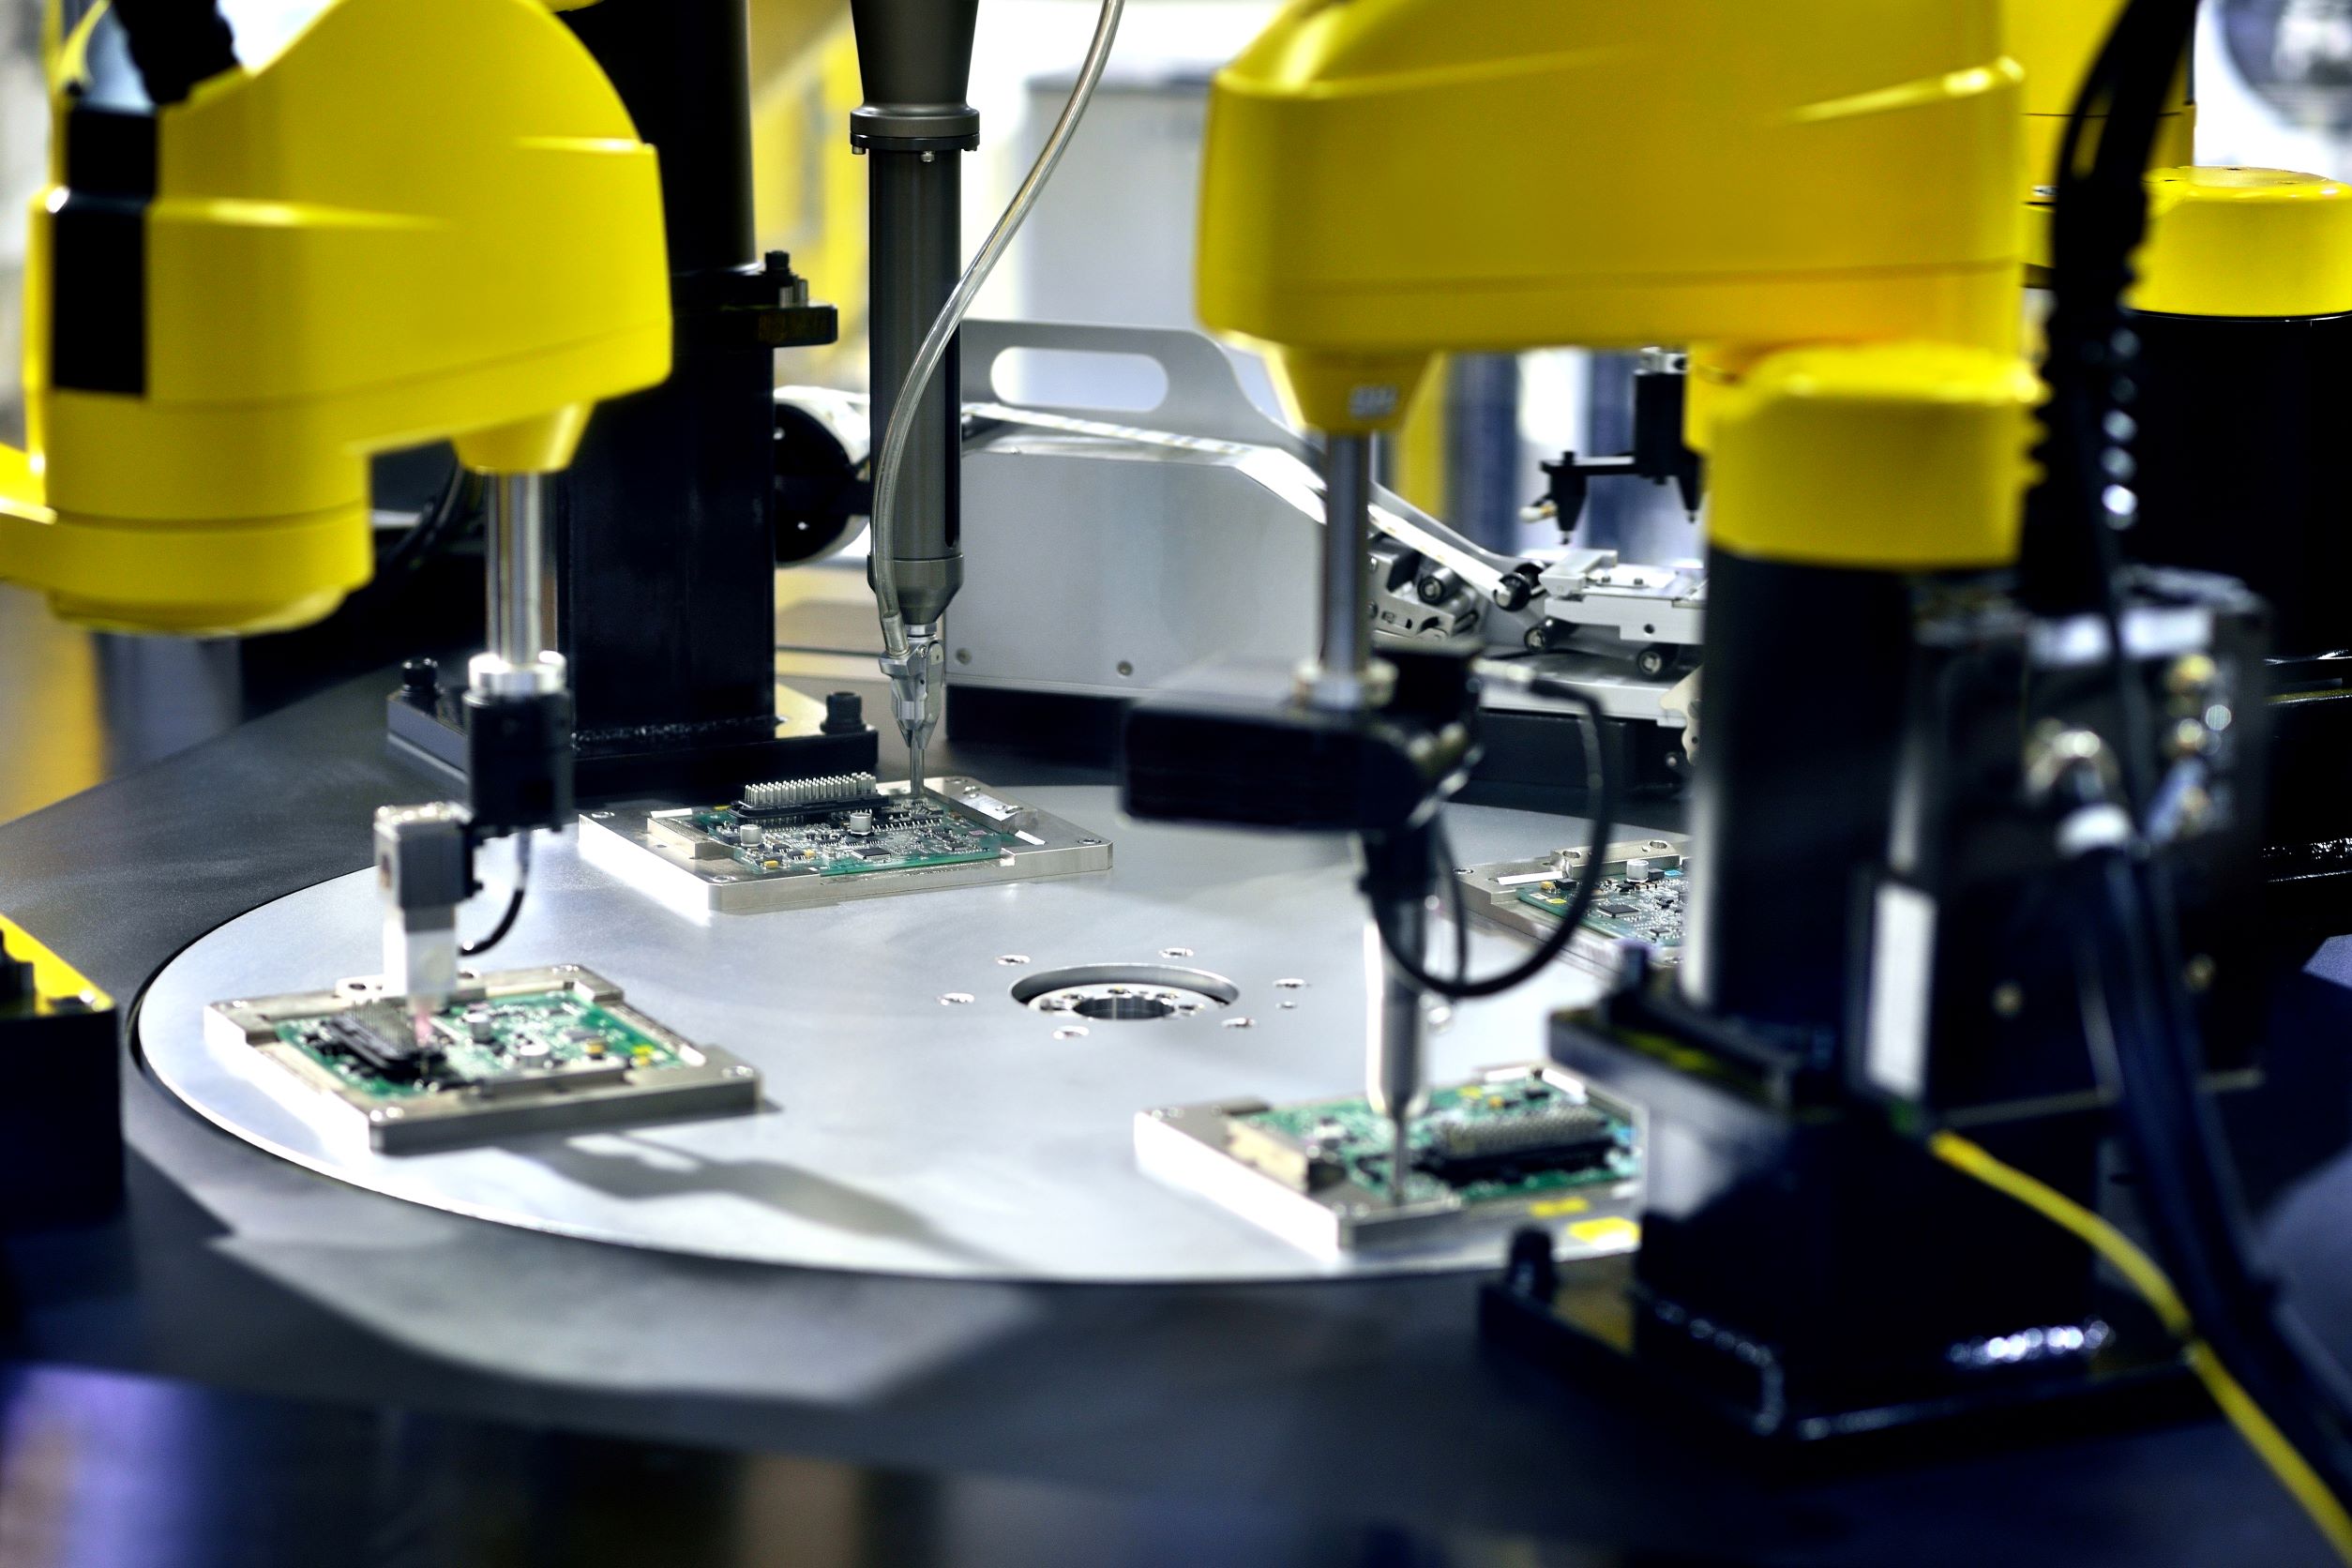 To help semiconductor manufacturers deliver high-quality products and growth, vendors of industrial automation devices should offer cutting-edge solutions leveraging Time-Sensitive Networking (TSN).